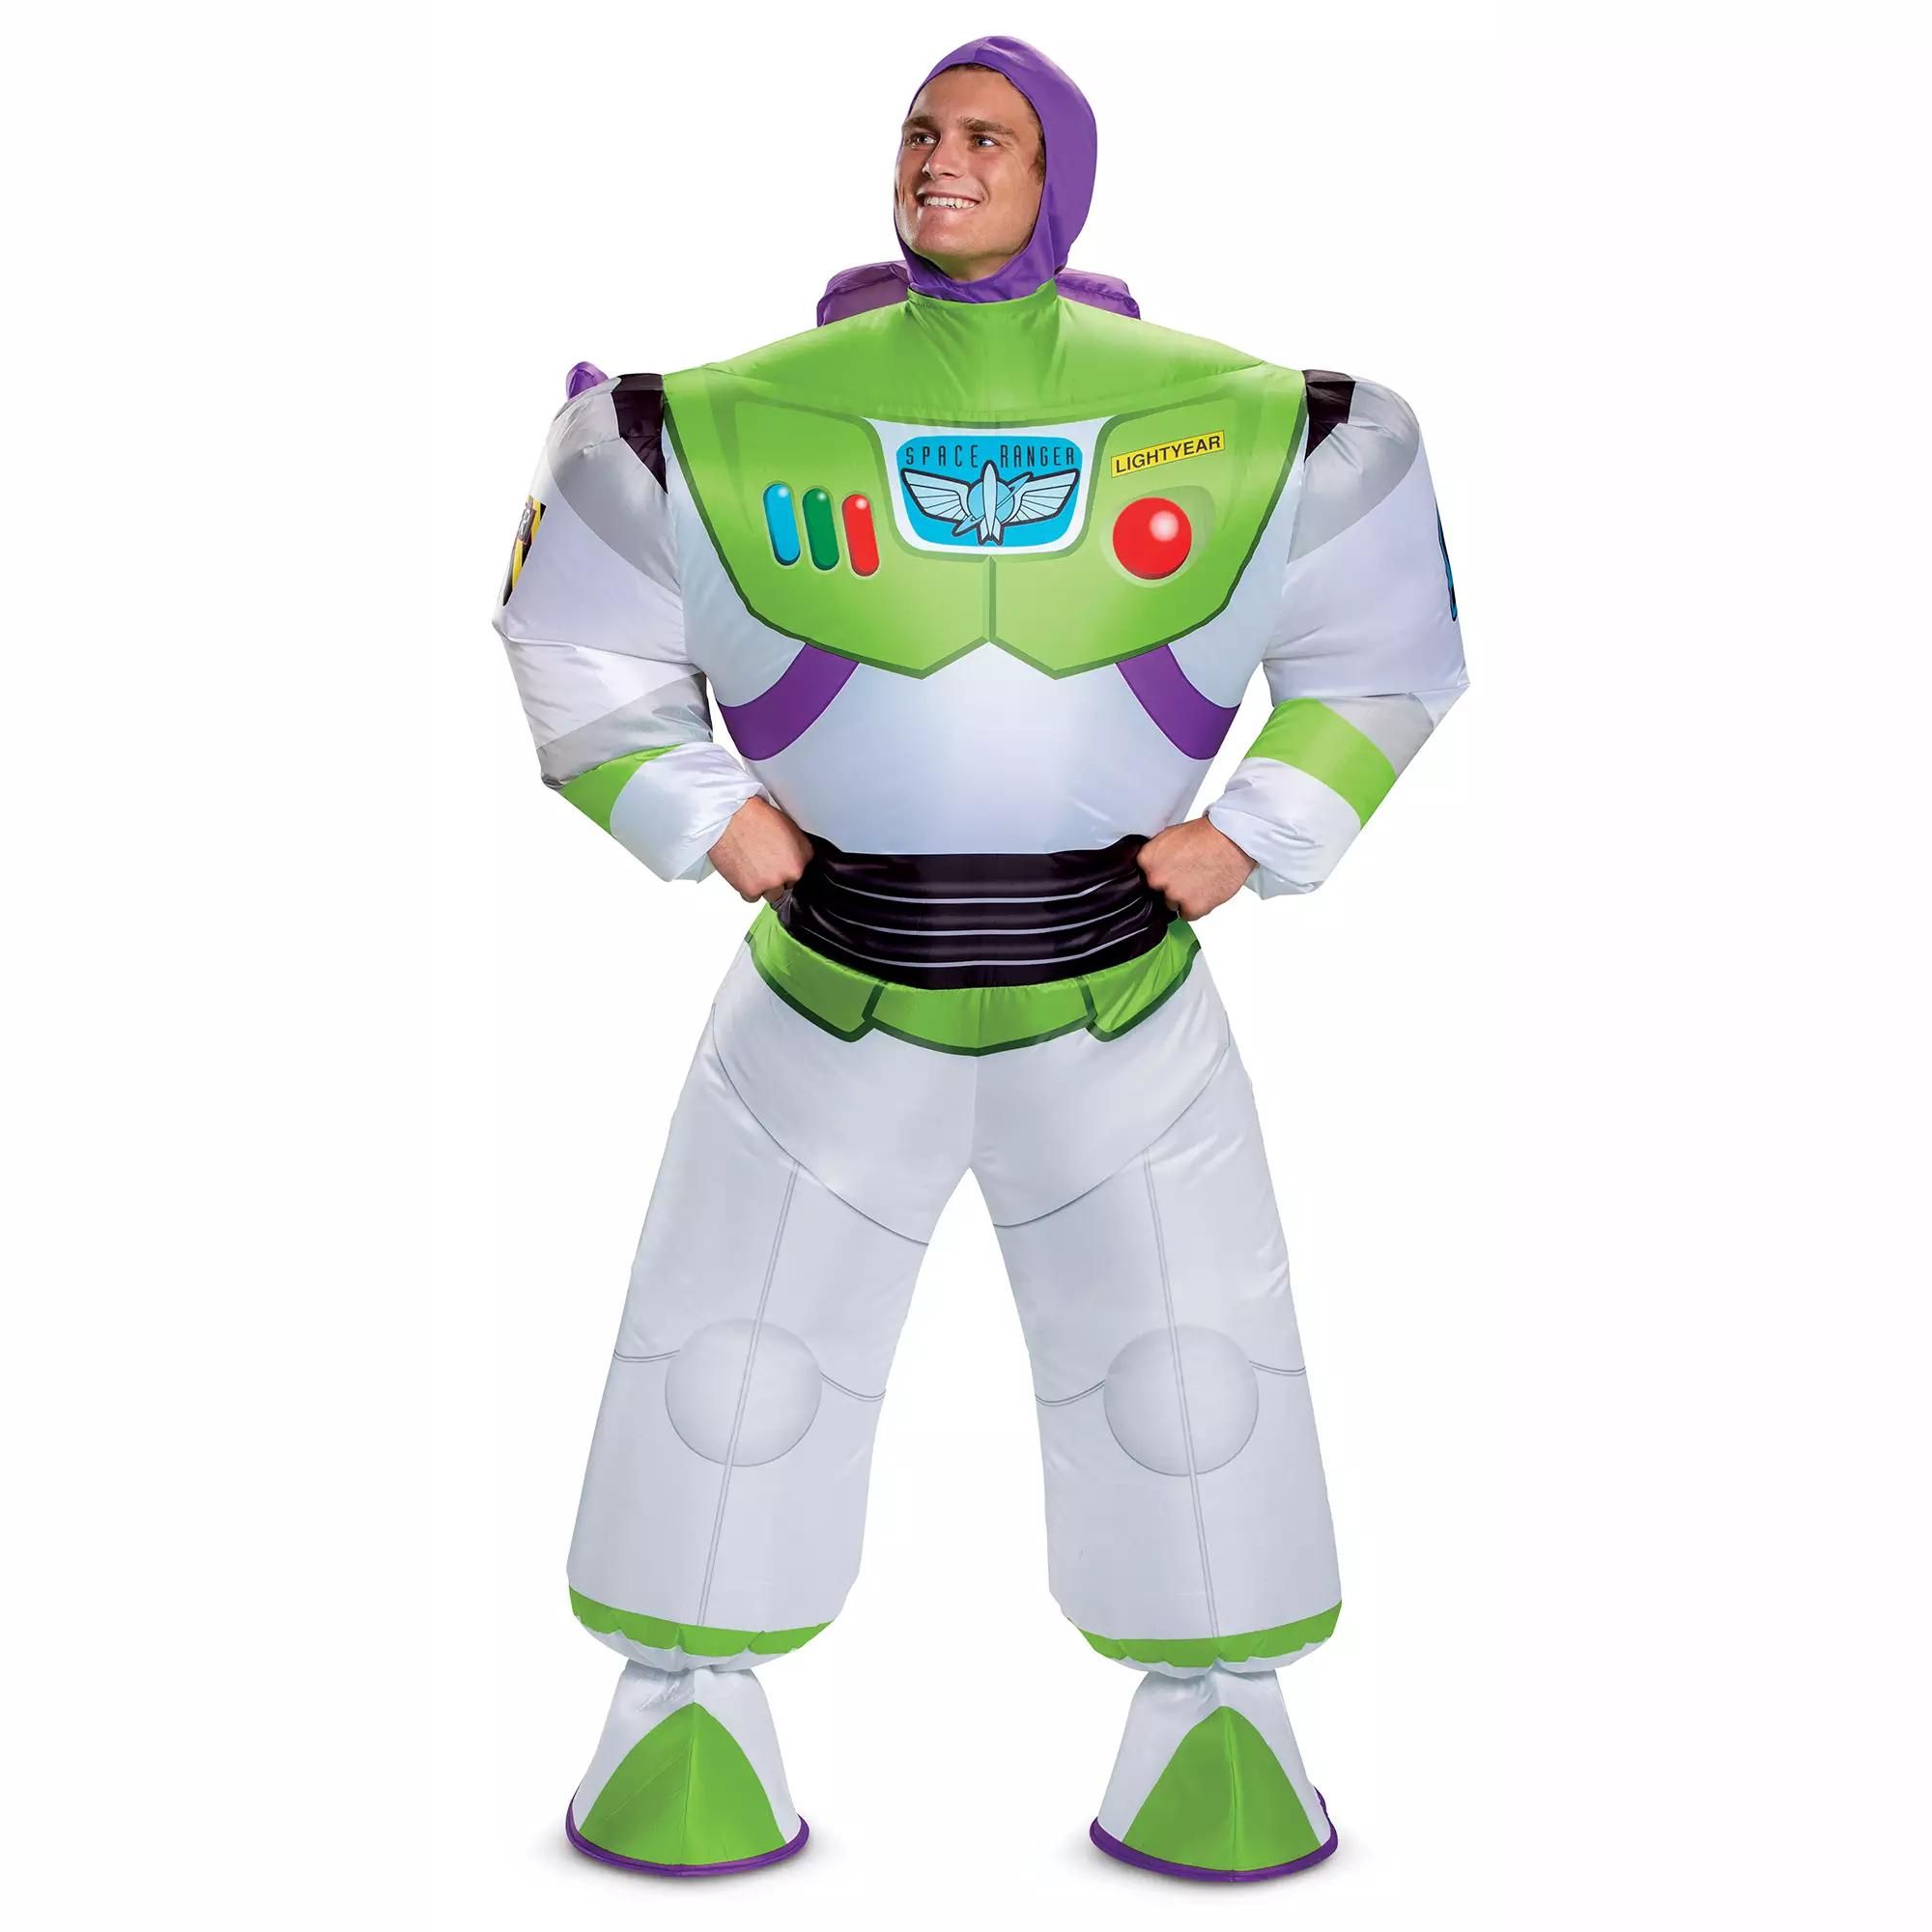 Buzz Lightyear Inflatable Costume for Adults